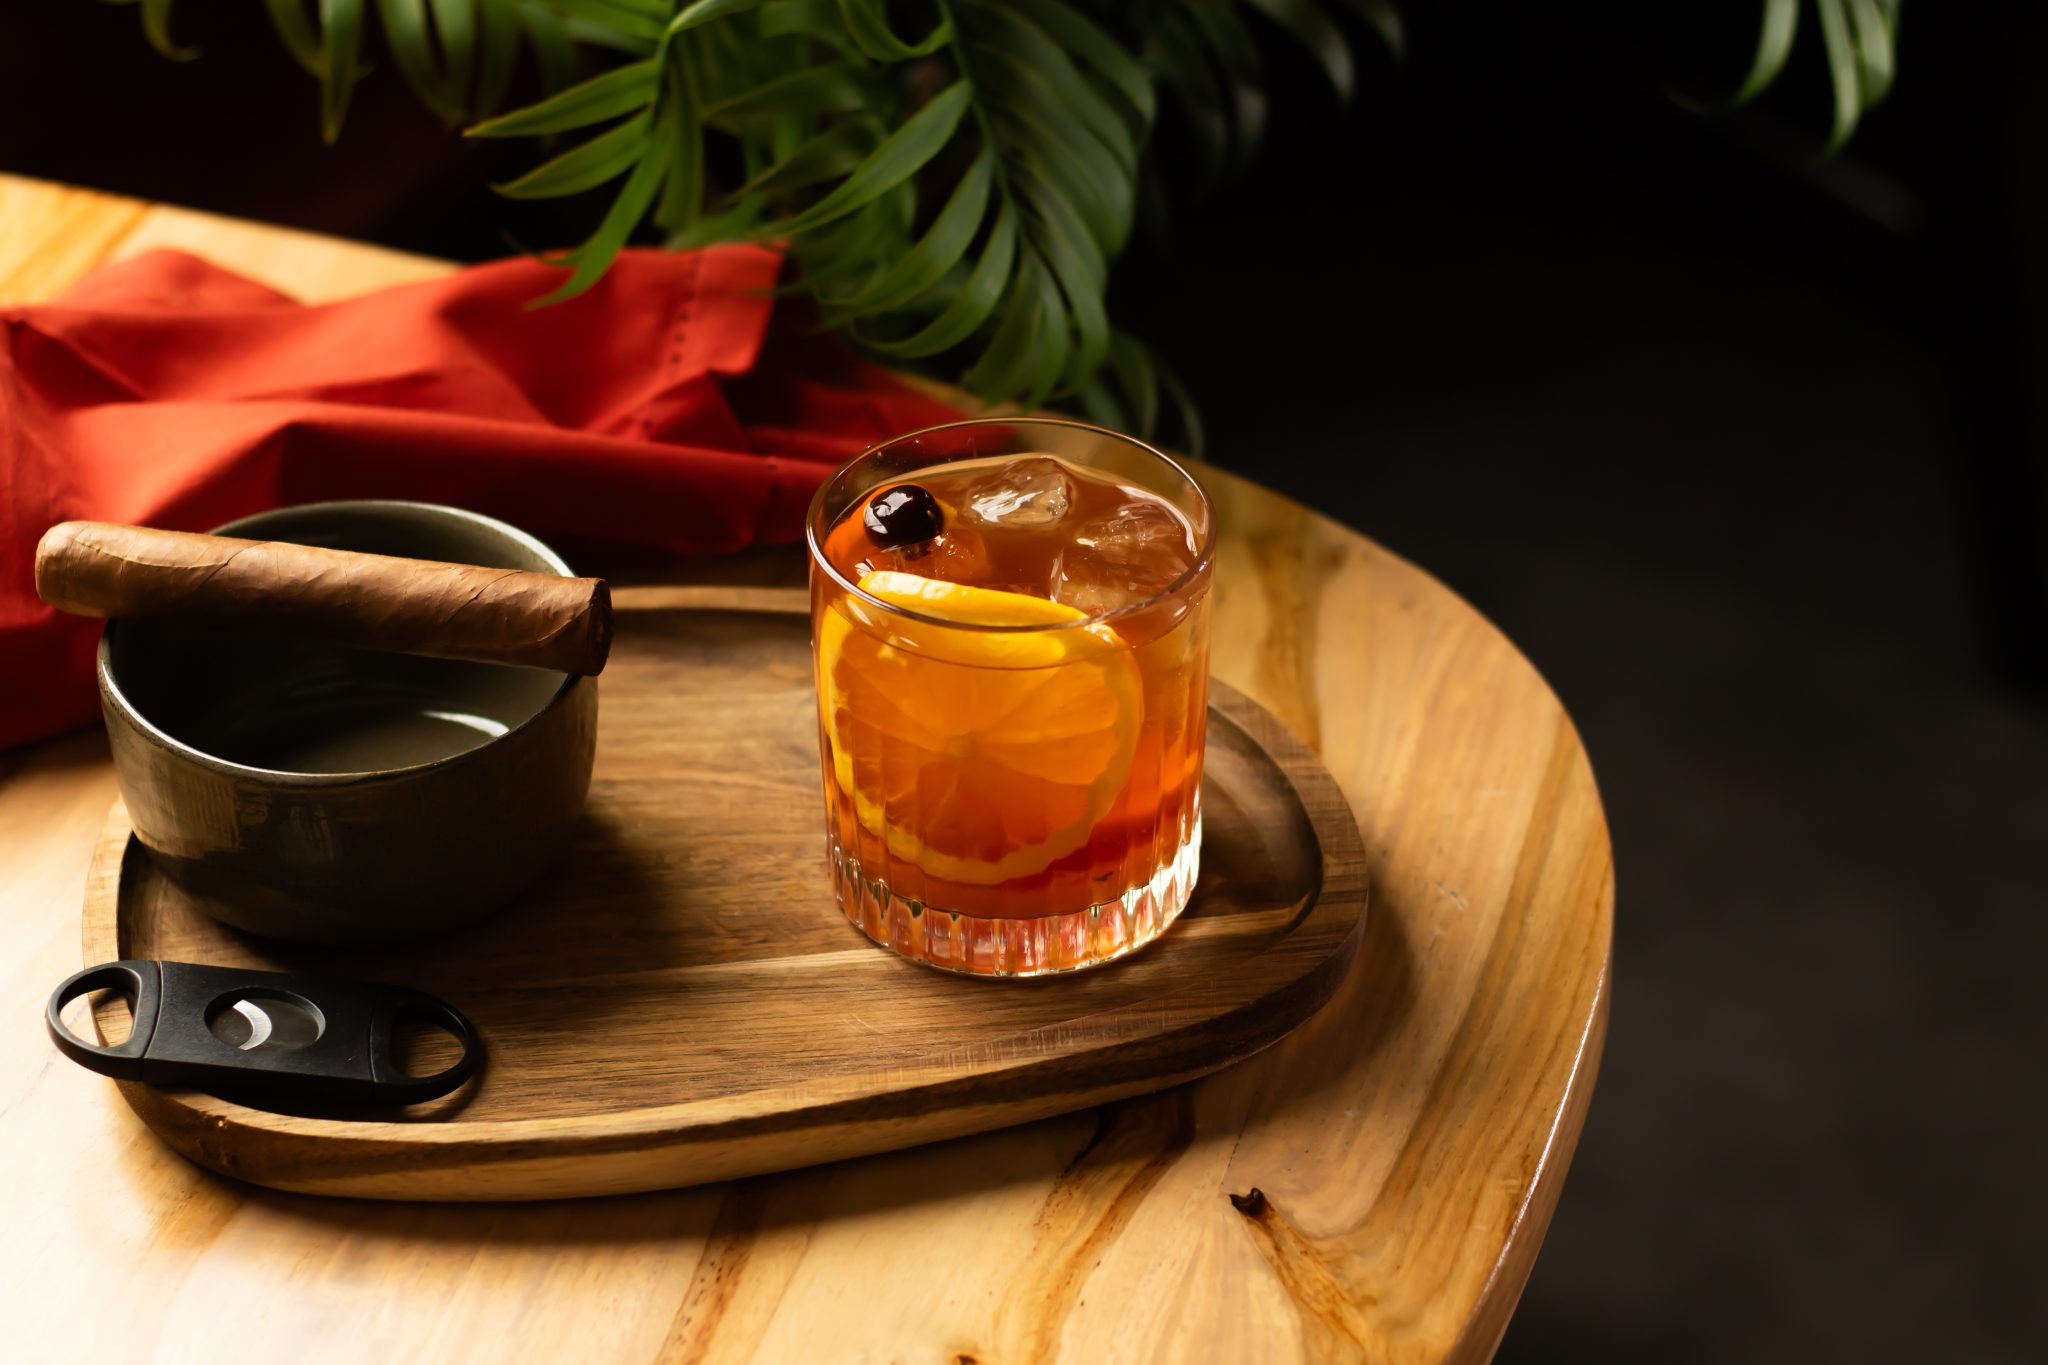 A side shot of a Brandy Wisconsin Old Fashioned cocktail in an old fashioned glass on a wooden board placed on a wooden table surrounded by a brown bowl, a cigar, a red cloth, and a cigar cutter.